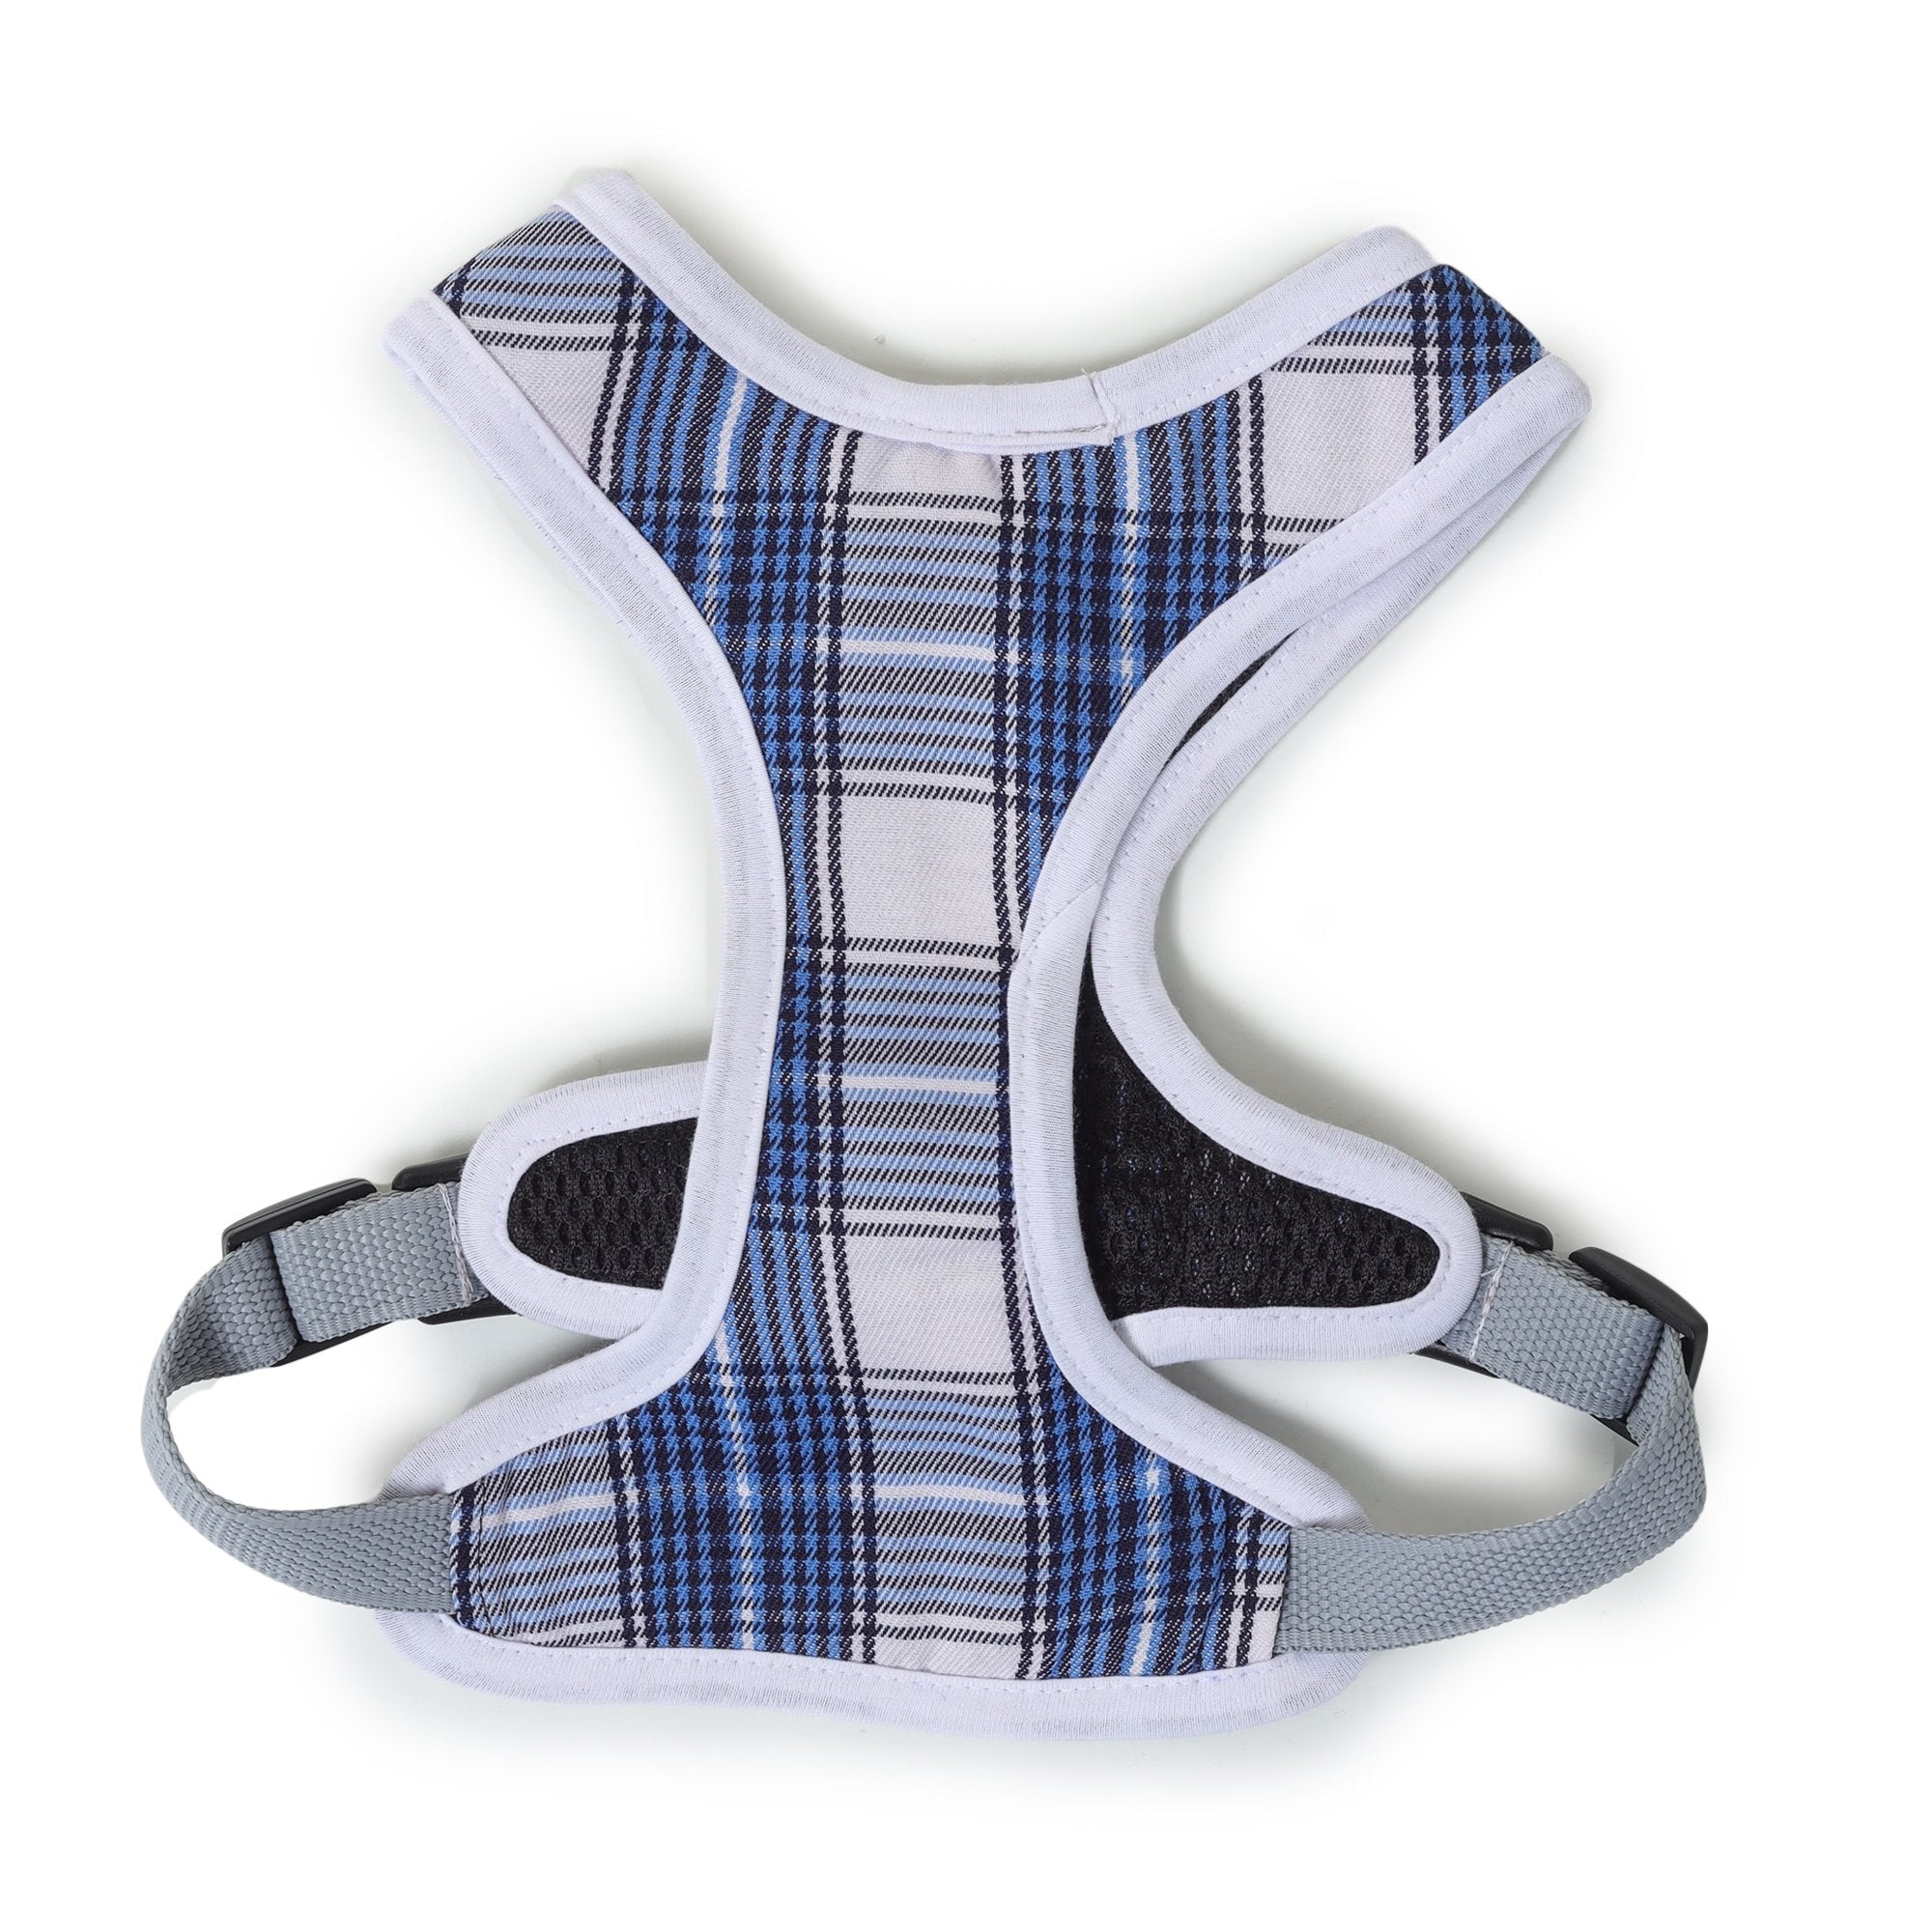 no-pull harness for dogs by Barks & Wags